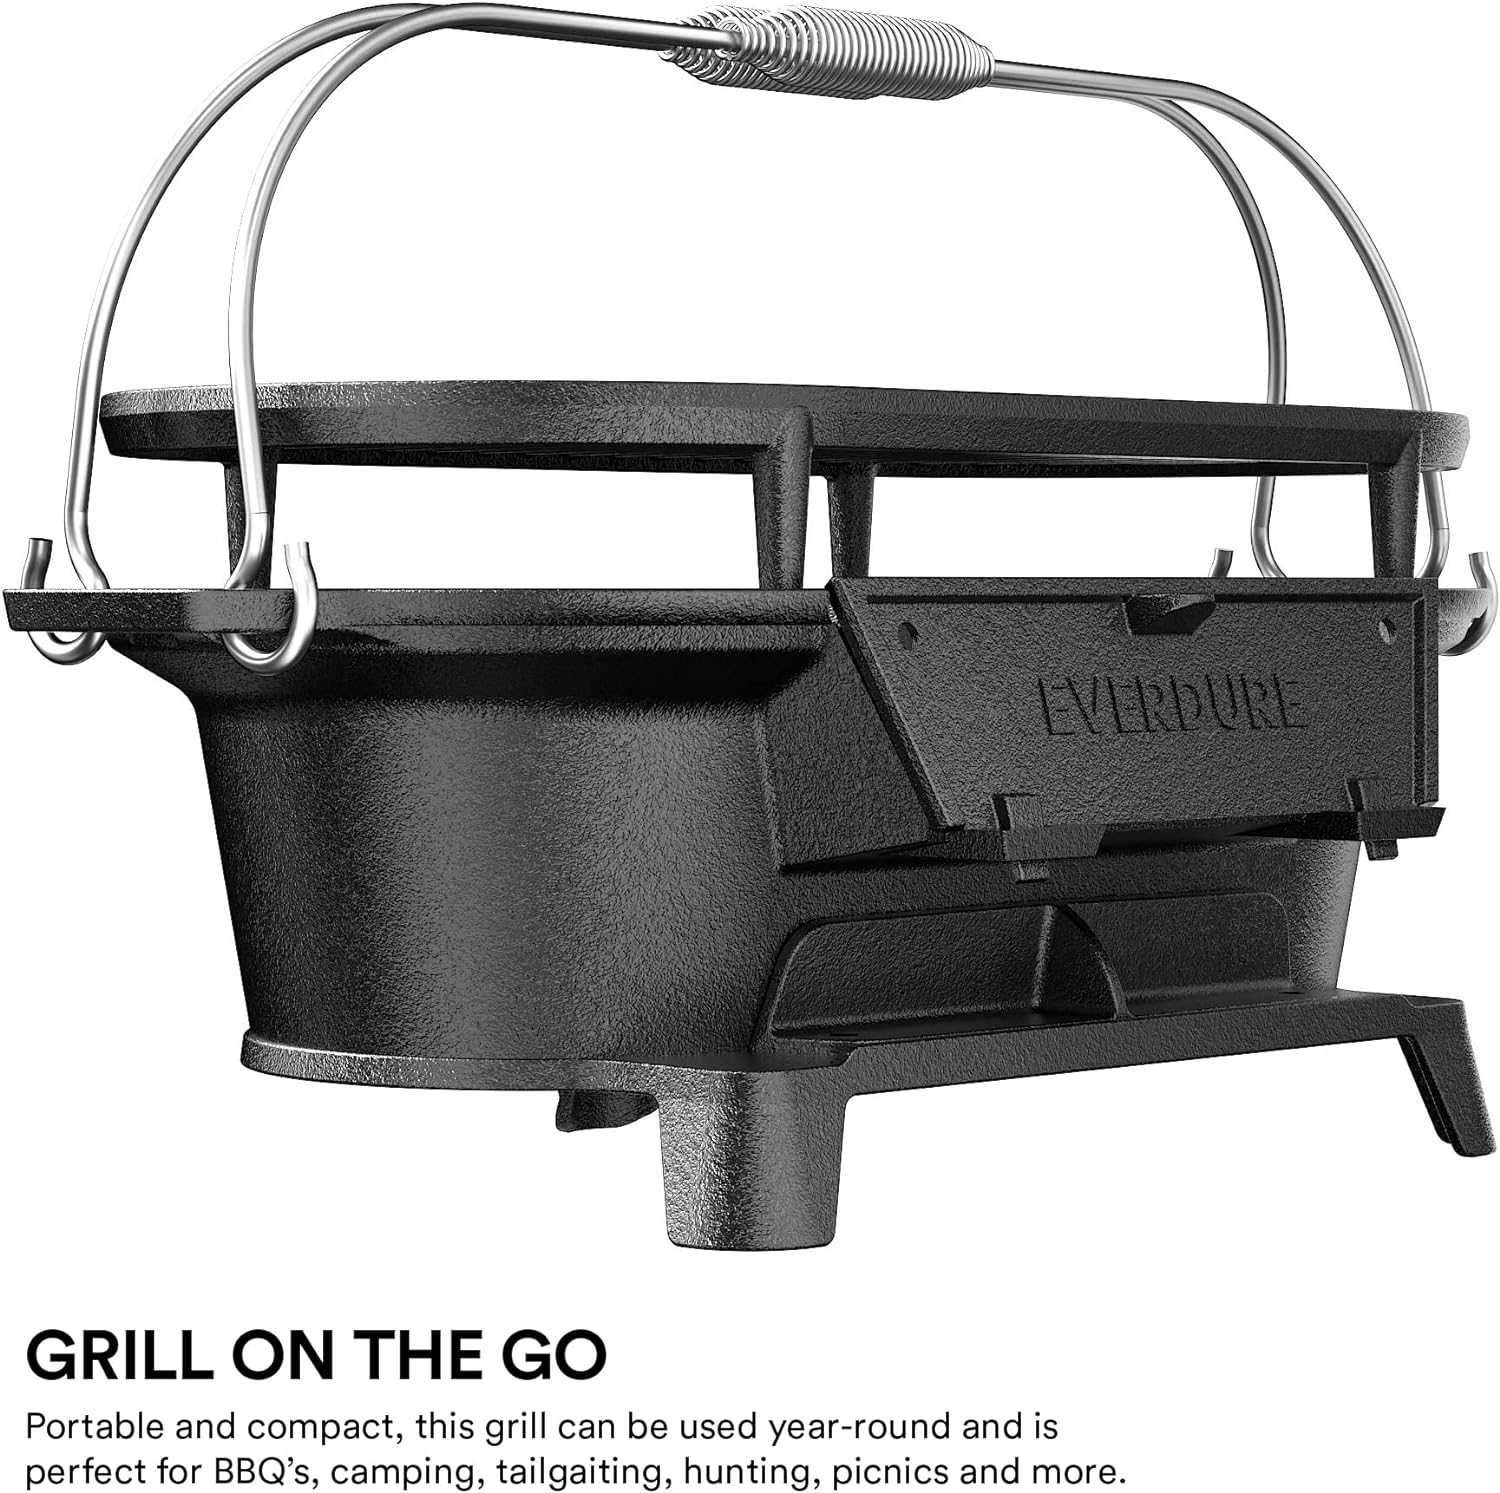 Everdure Oval Cast Iron Grill  Cover – Outdoor, Portable Charcoal Grill and Tabletop Cast Iron Skillet - 100% Cast Iron, Enameled, Durable, Small Charcoal Grill, Camping Stove, Hibachi Grill